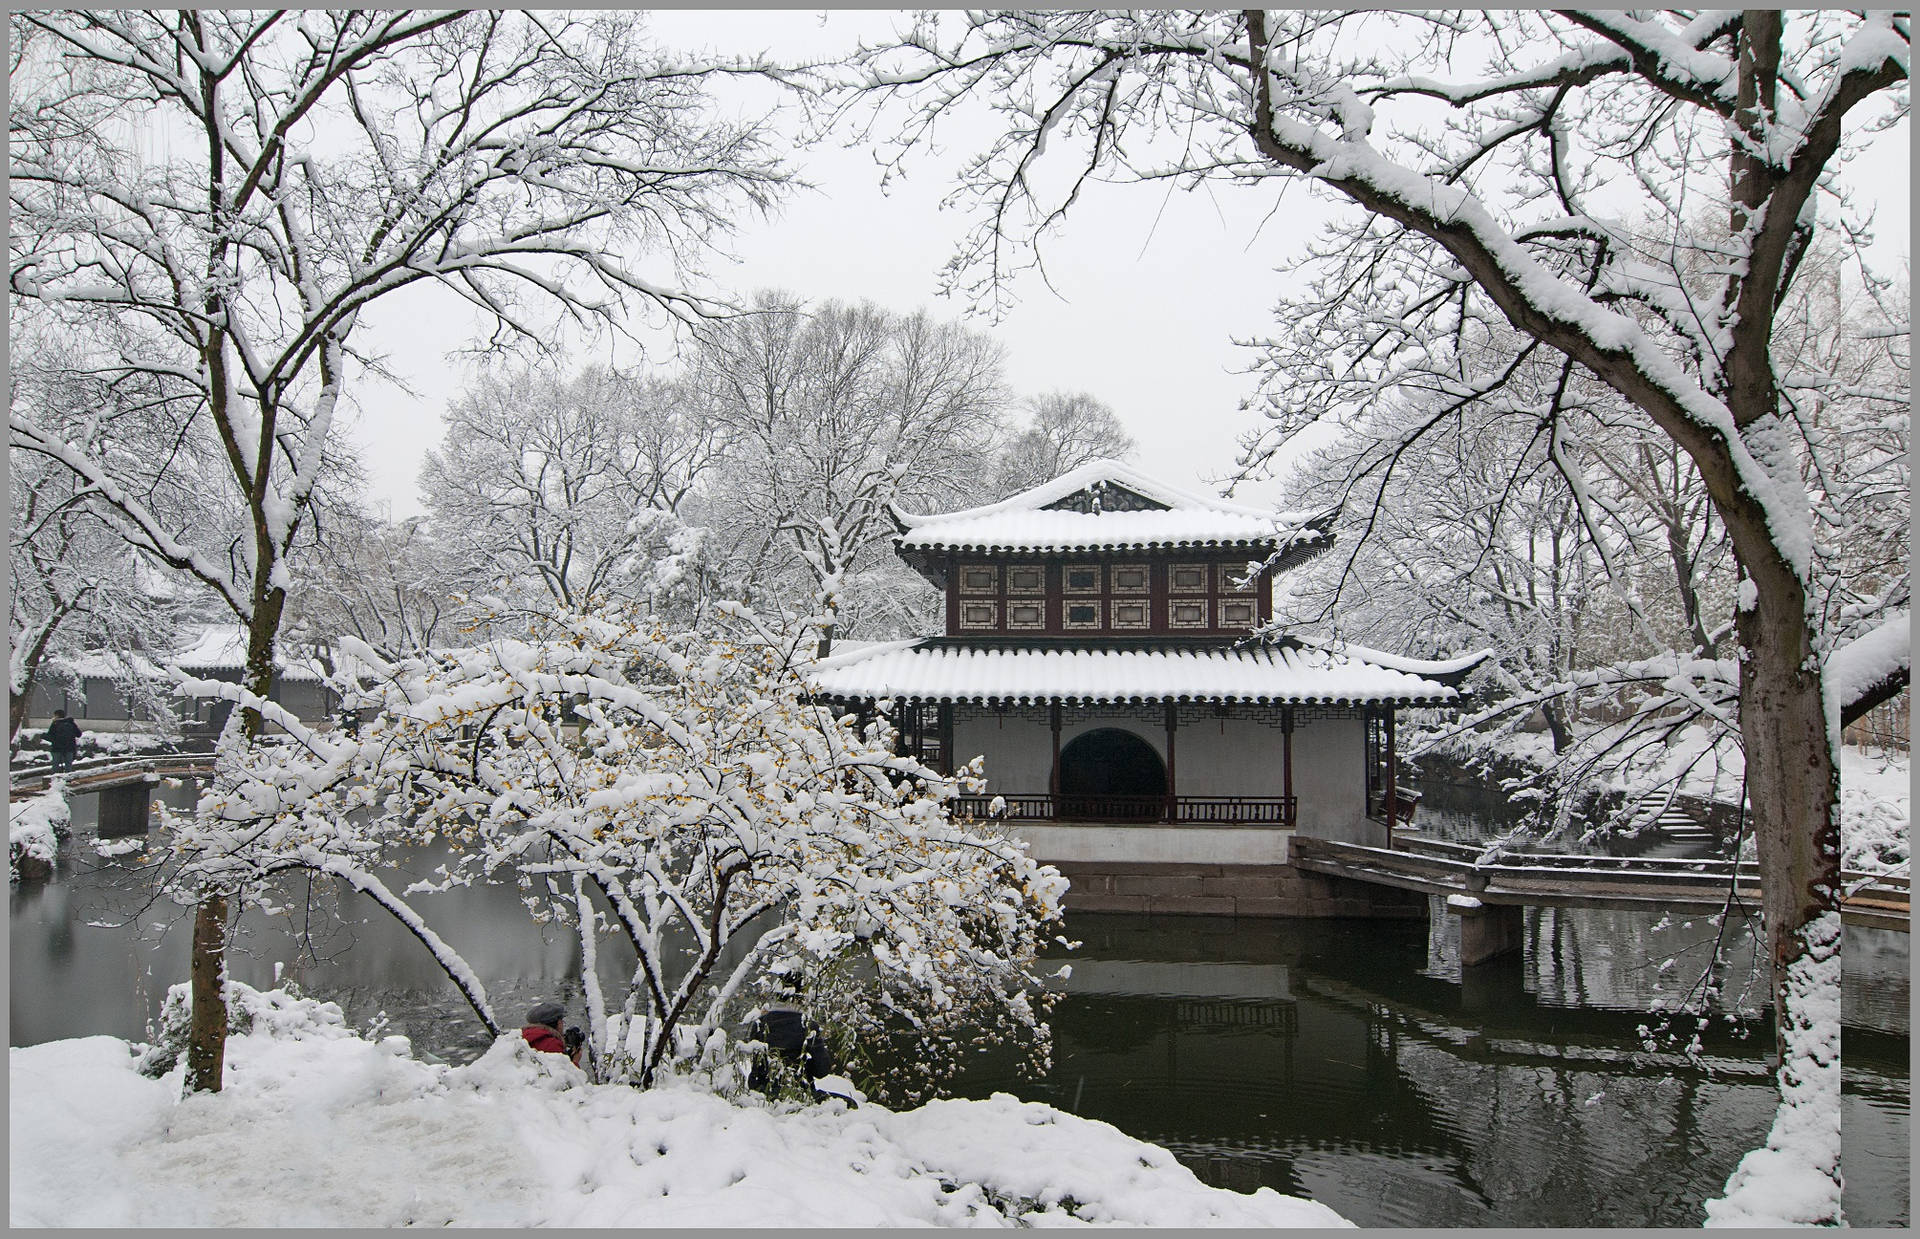 This Would Be A Potential Title For A Computer Or Mobile Wallpaper Featuring An Image Of The Suzhou Humble Administrator's Garden. Wallpaper